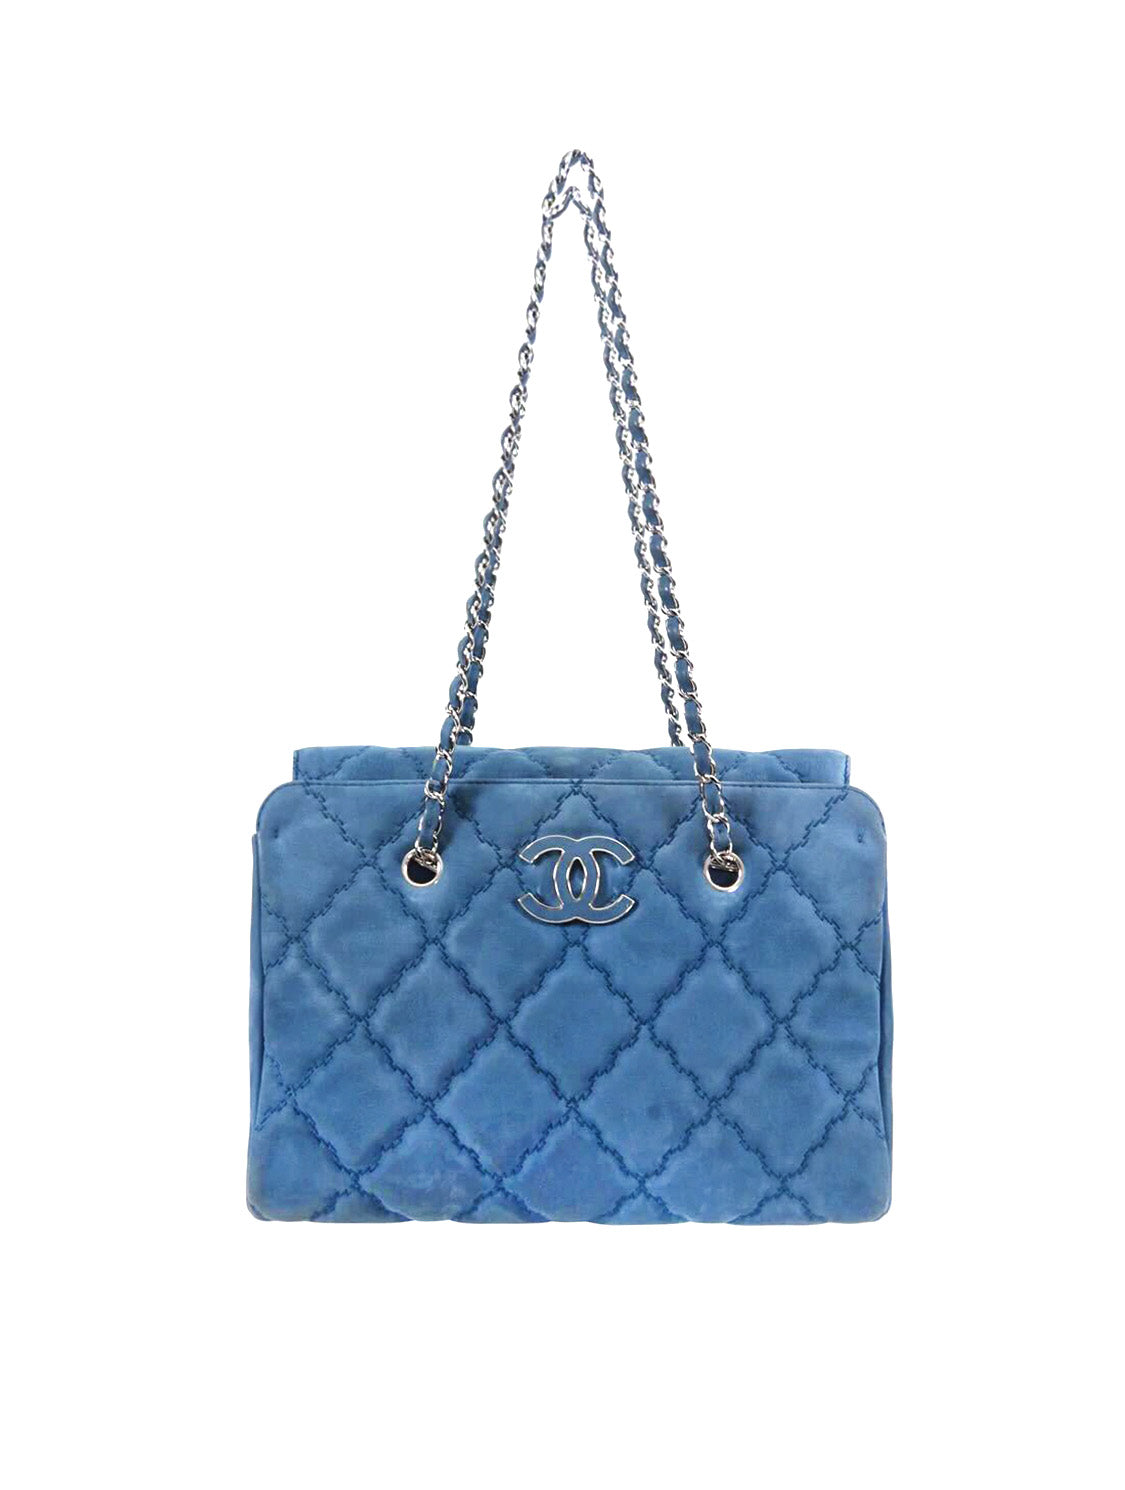 Pre-owned Chanel 2013 Cc-logo Diamond-quilted Crossbody Bag In Blue